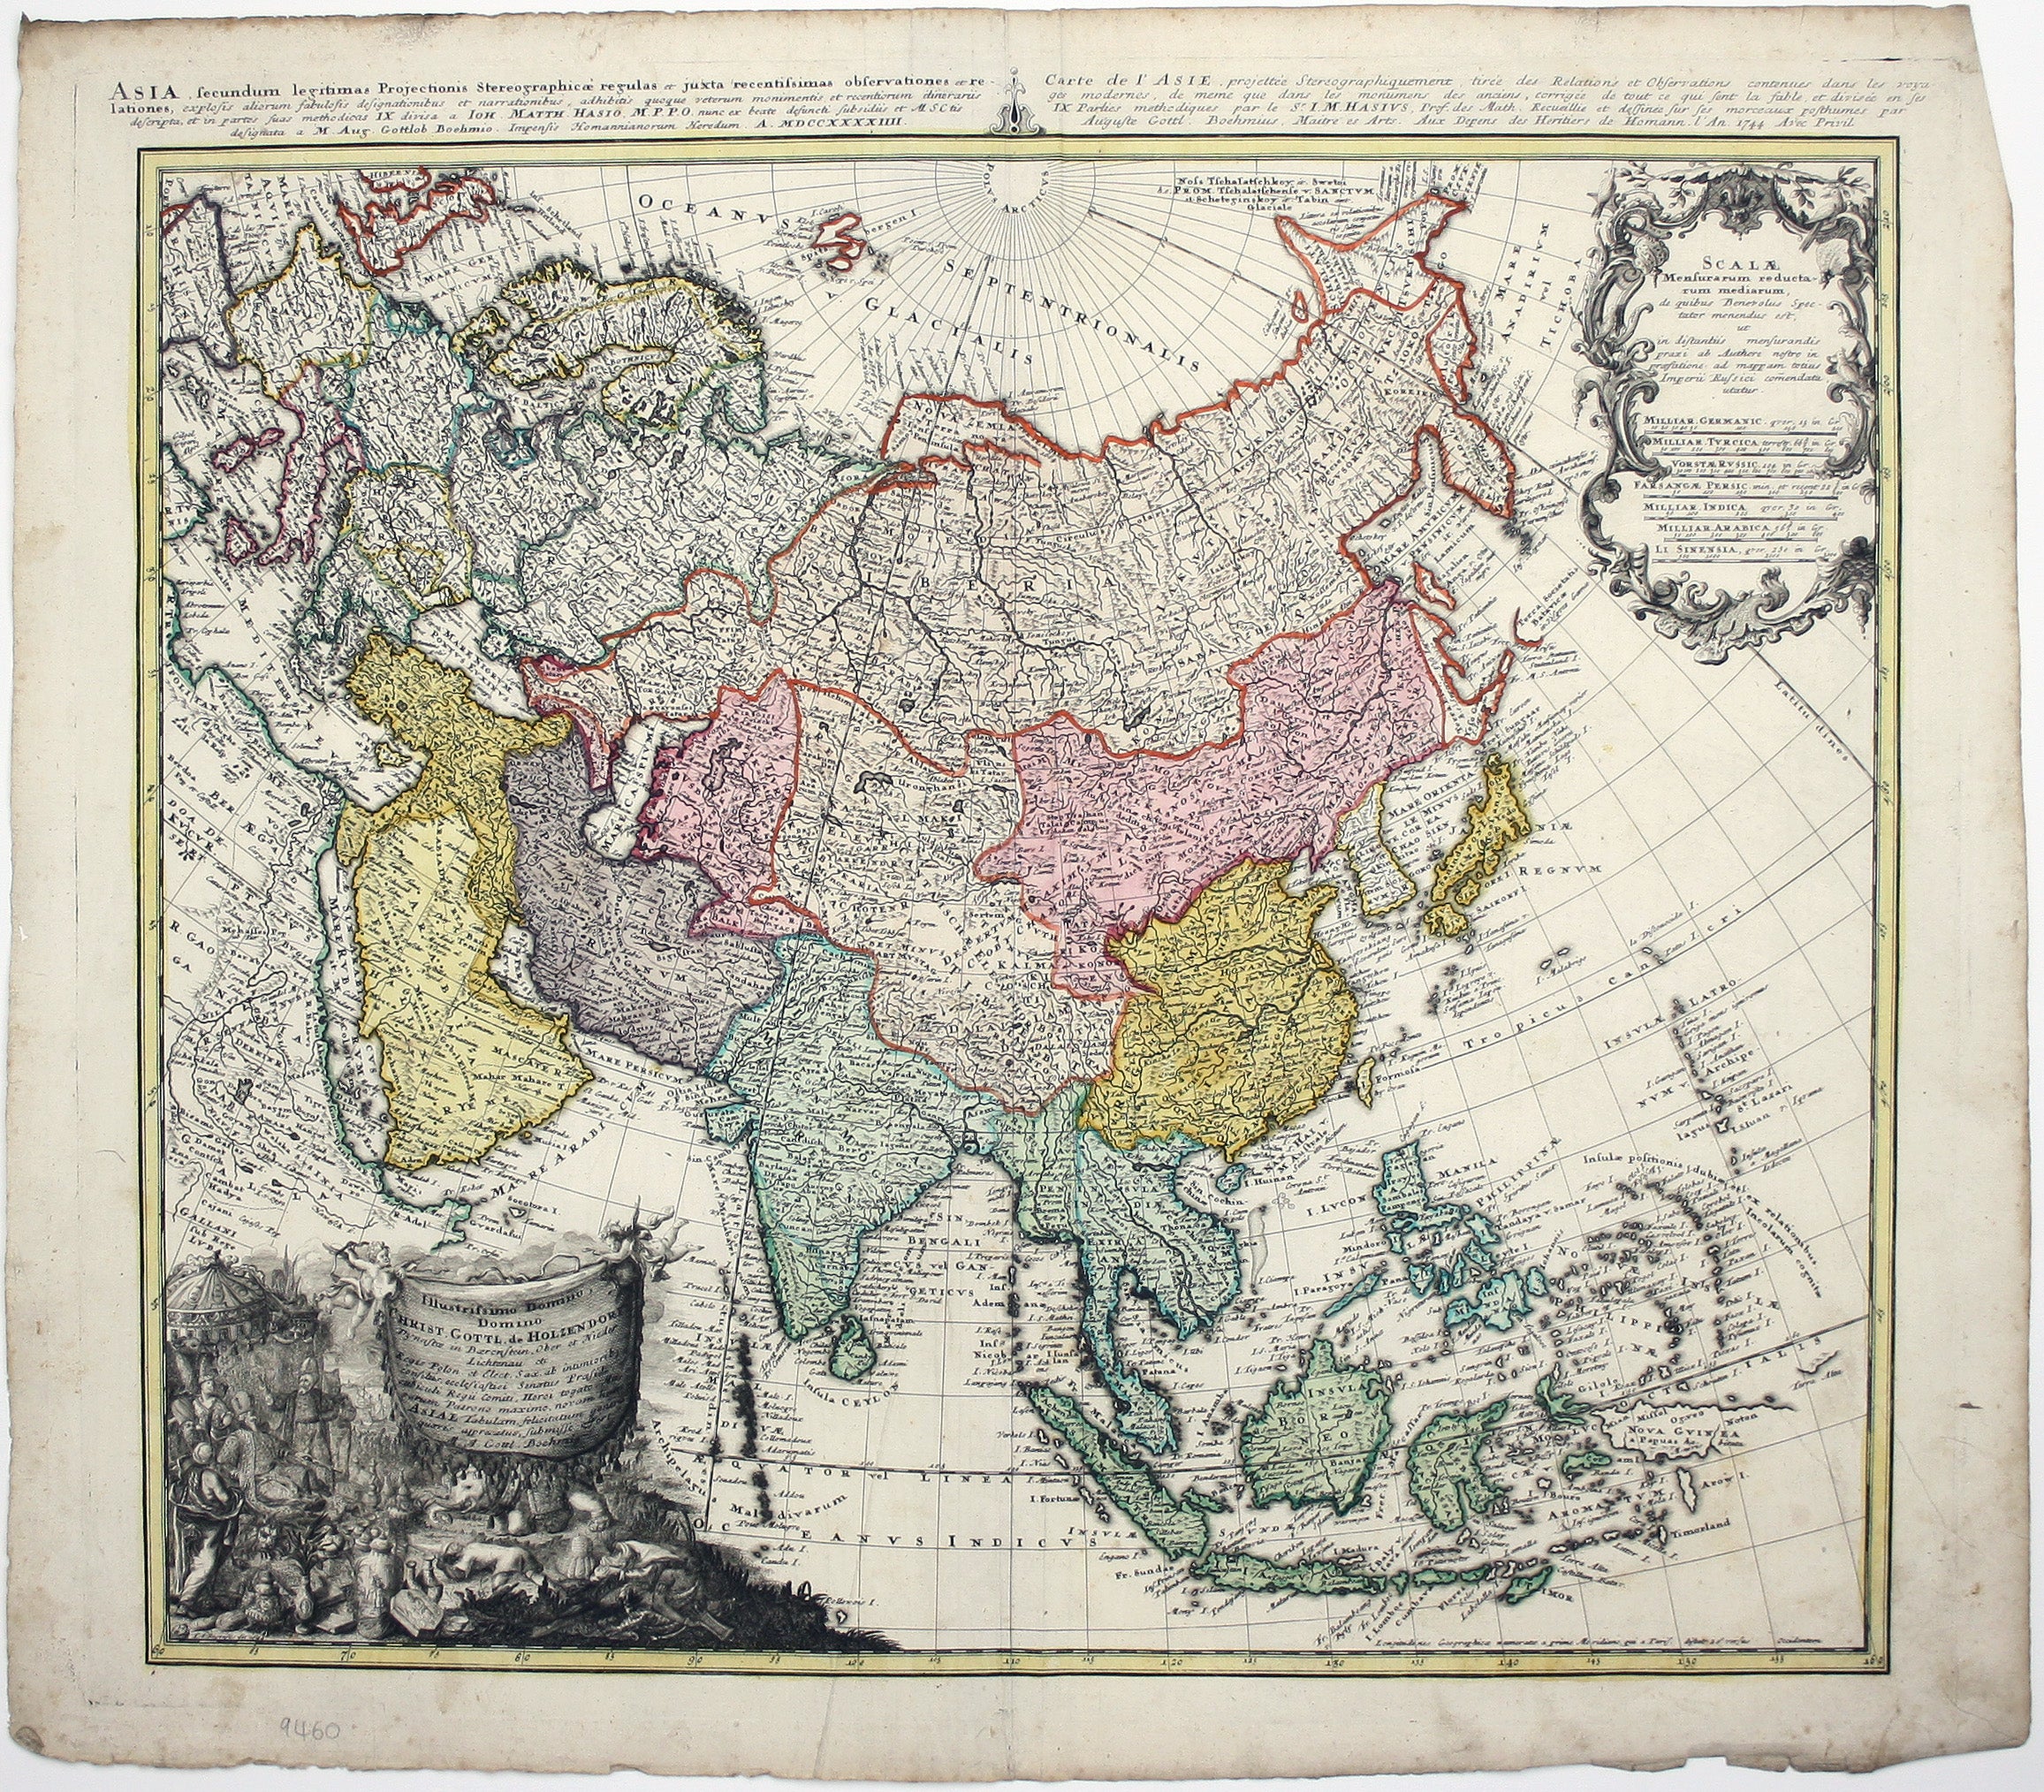 Variant of Hase’s Map of Asia